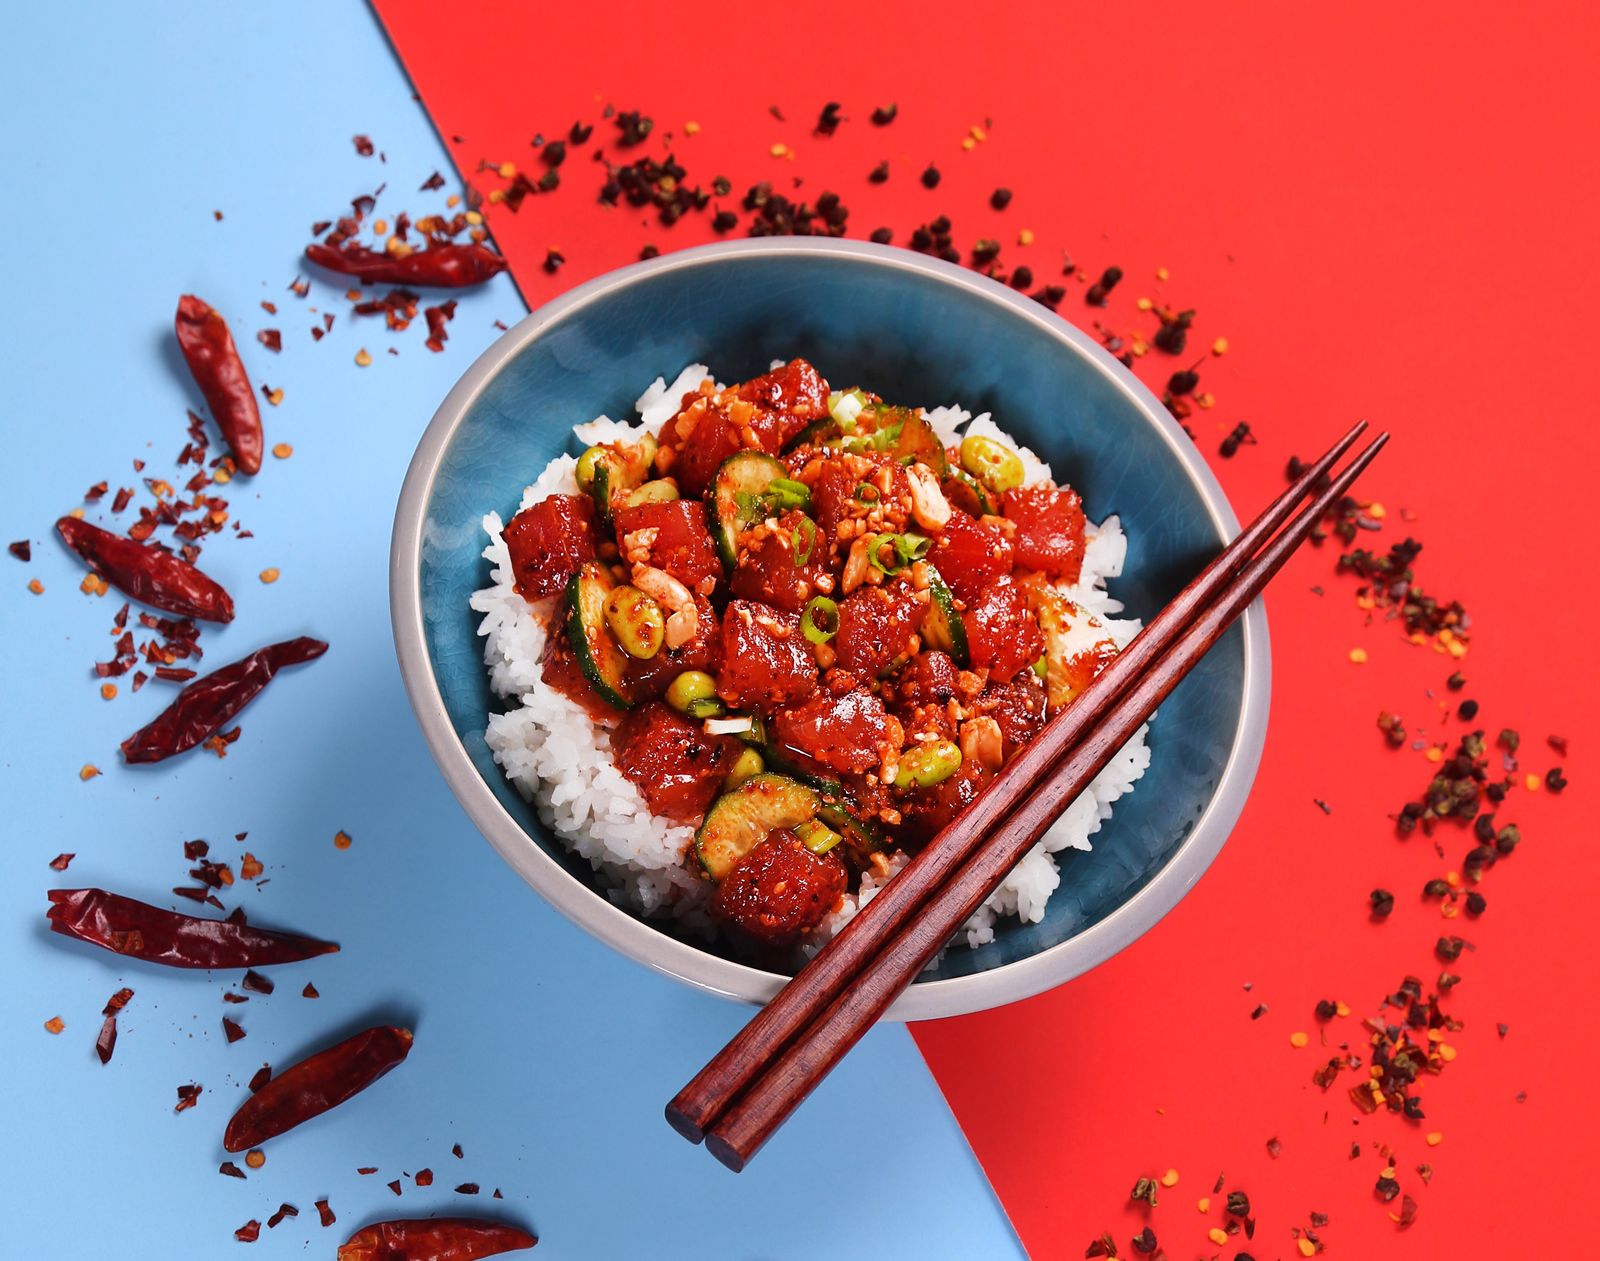 Pokeworks Releases New Sichuan Bowl, Sparks Spicy Sensation